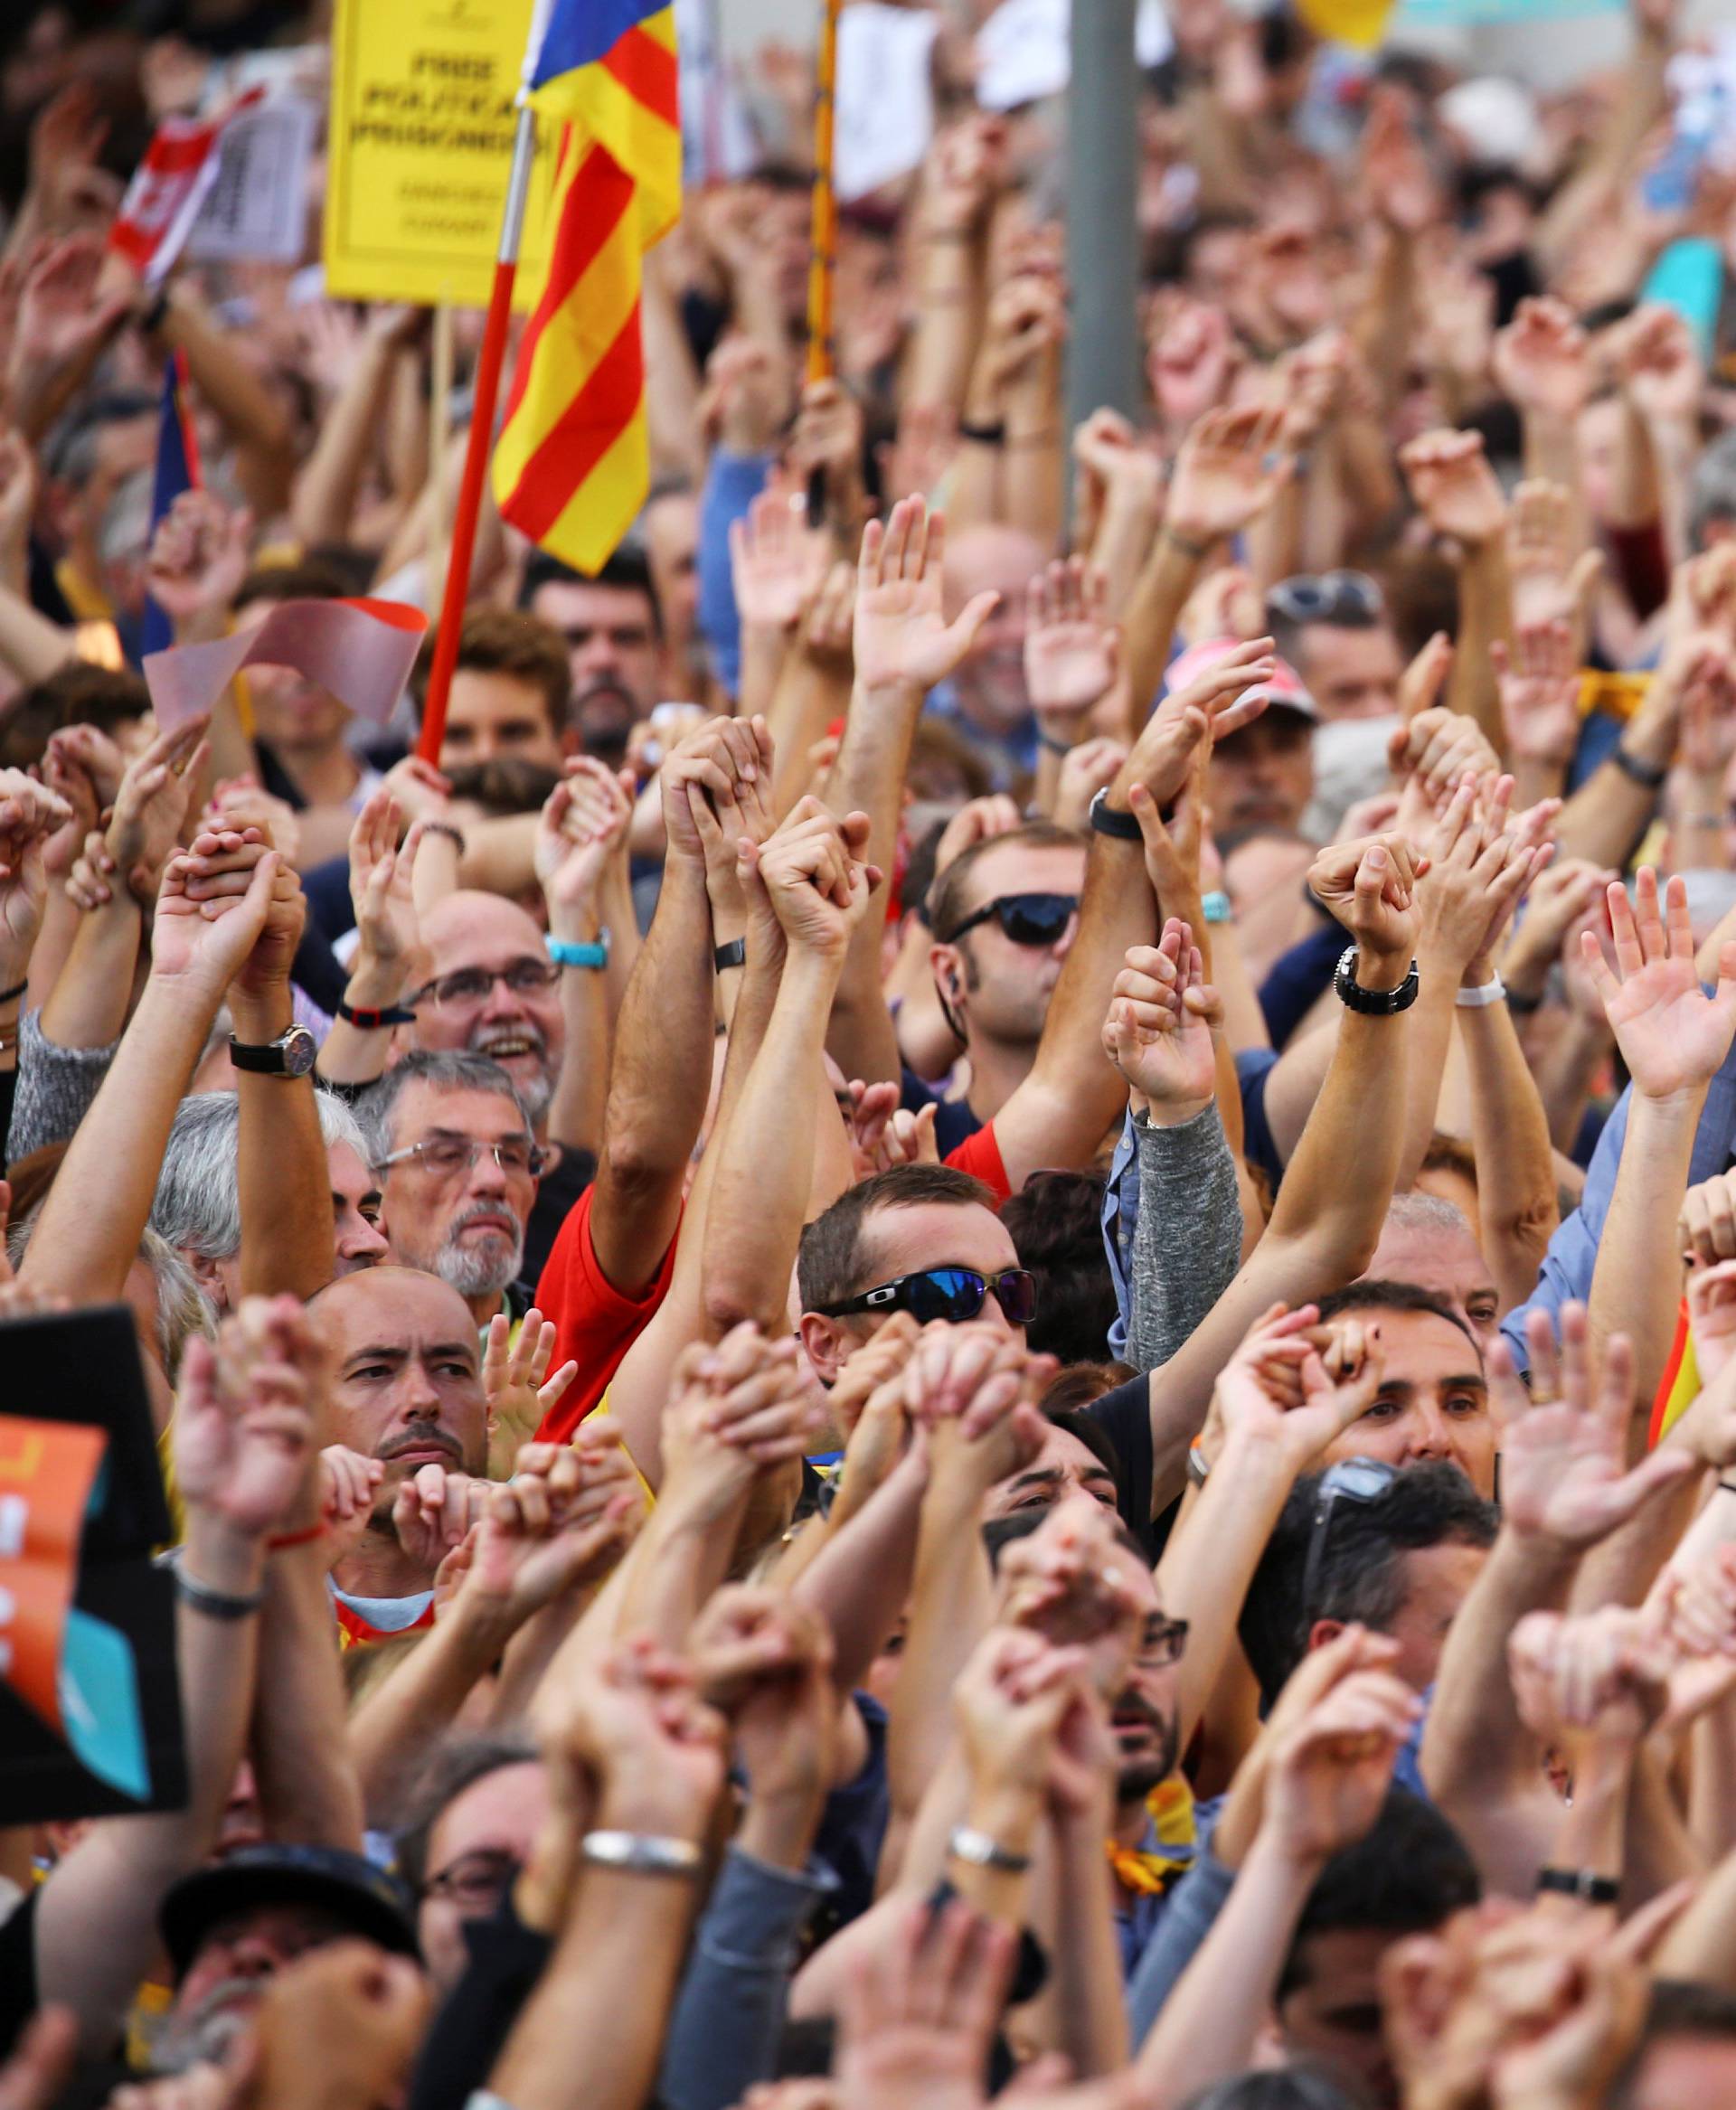 People raise their hands during a demonstration organised by Catalan pro-independence movements ANC (Catalan National Assembly) and Omnium Cutural, following the imprisonment of their two leaders in Barcelona